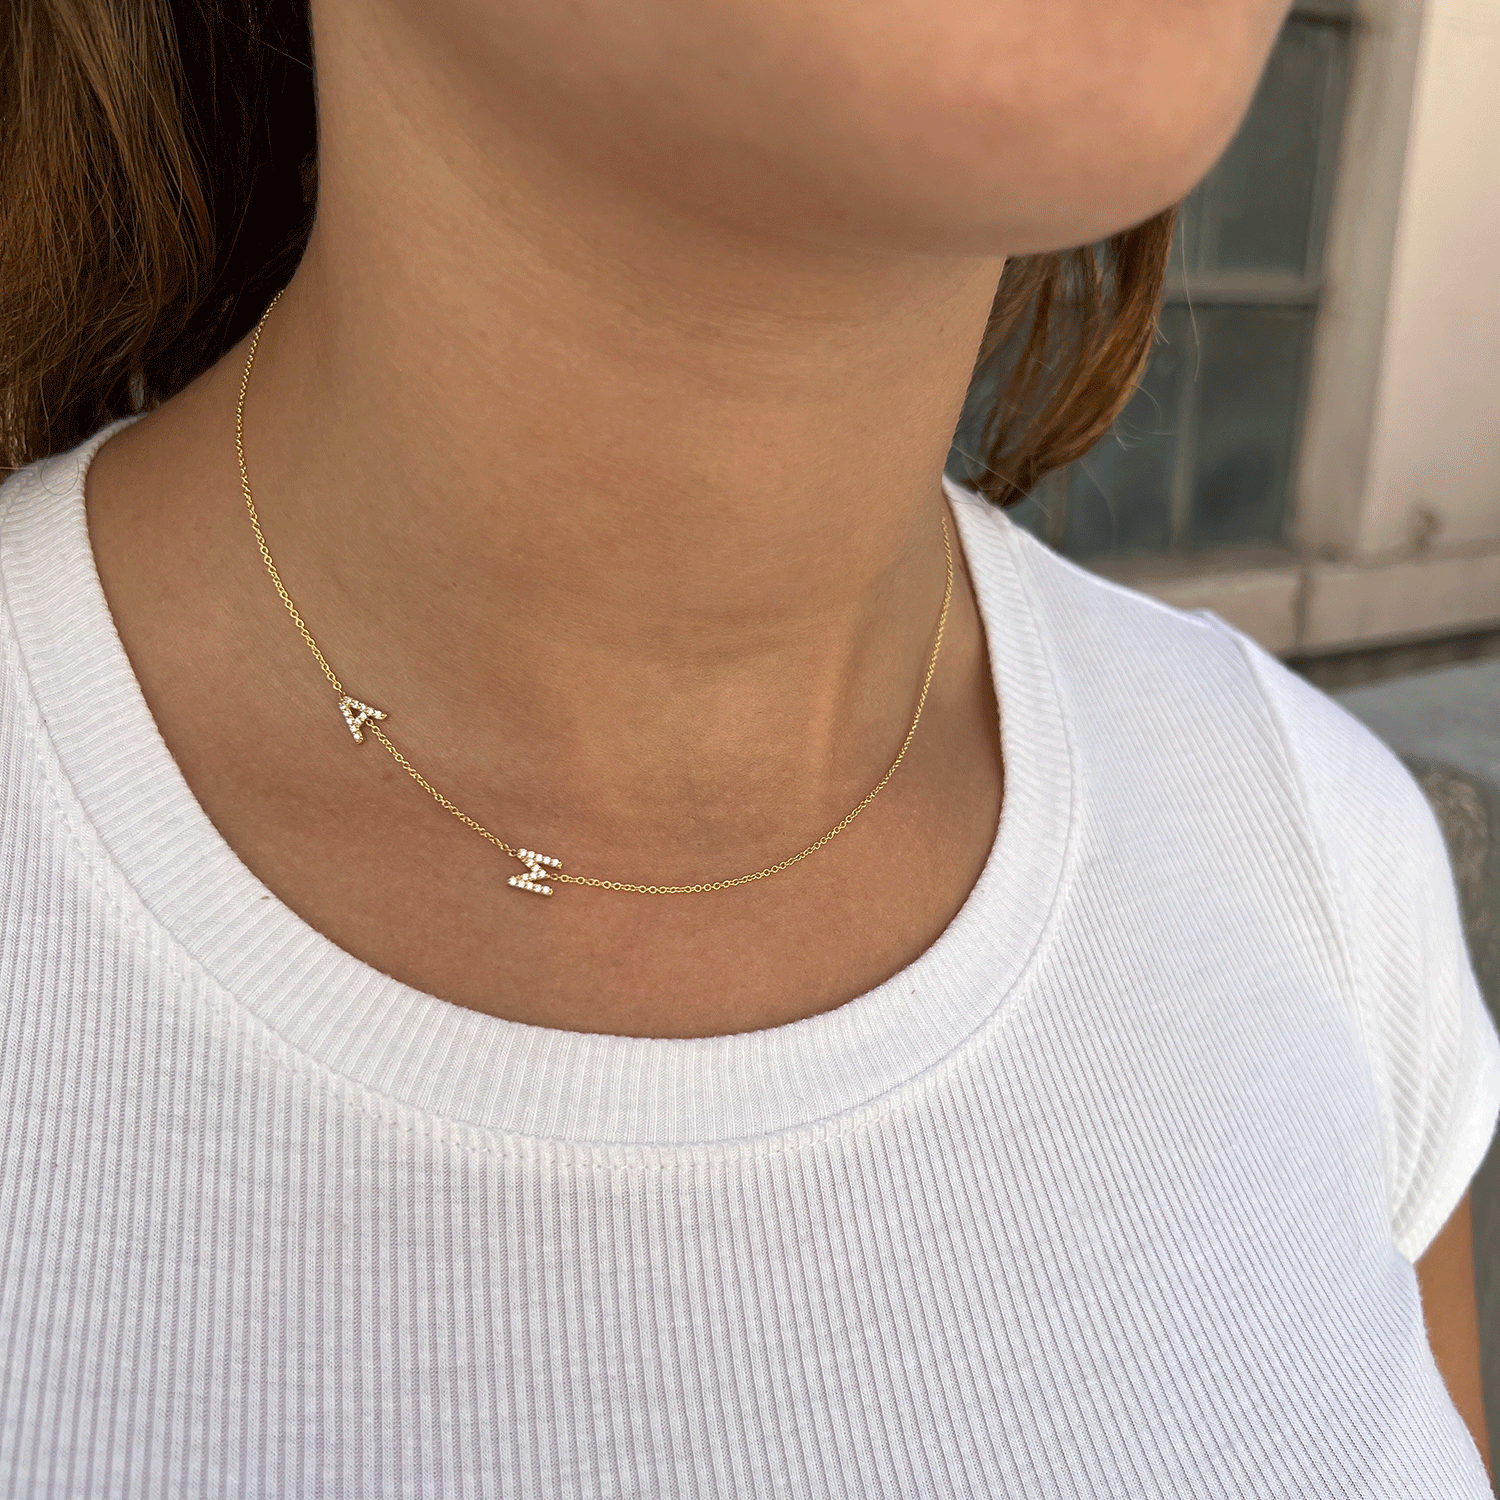 Sideways İnitial Necklace, Personalized Gift, Gold Initial Necklace, Vote  Necklace, Personalized Letter Necklace, Mother's Day Gift - Etsy